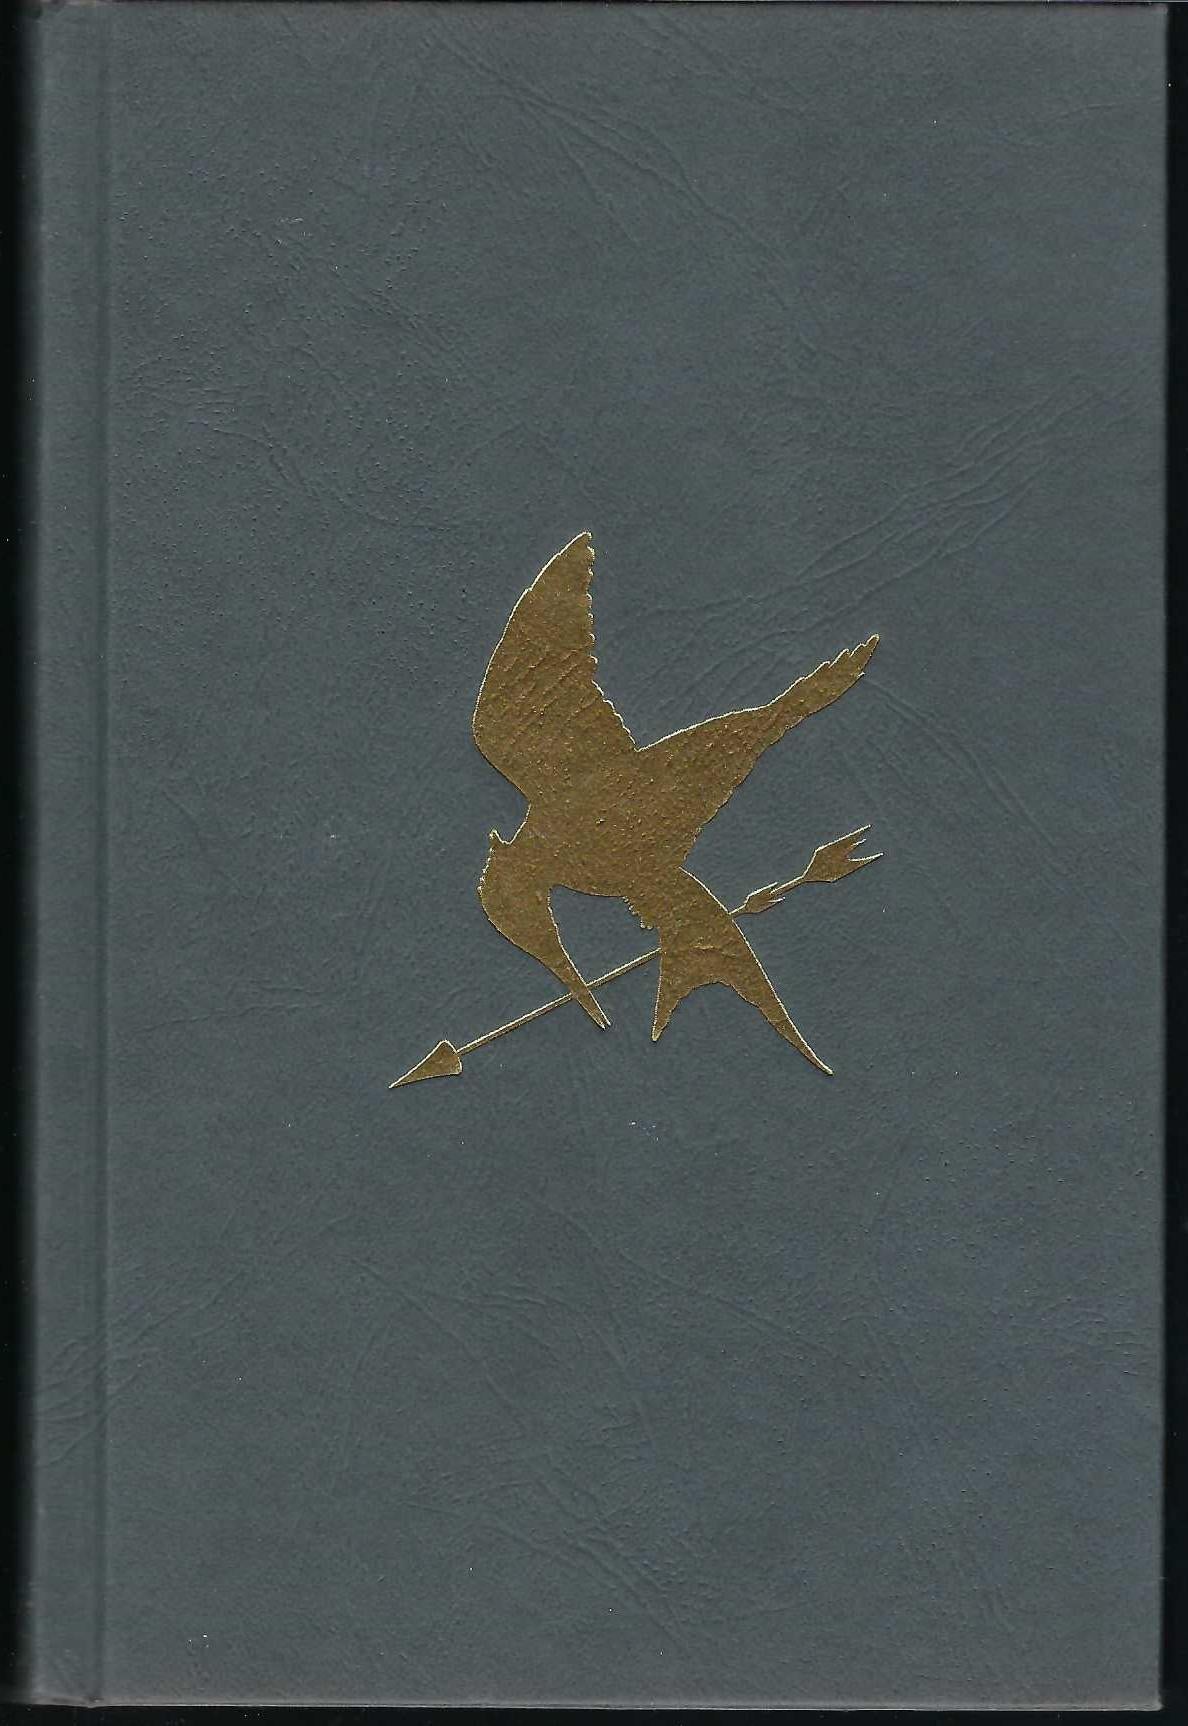 Hunger Games front cover - book